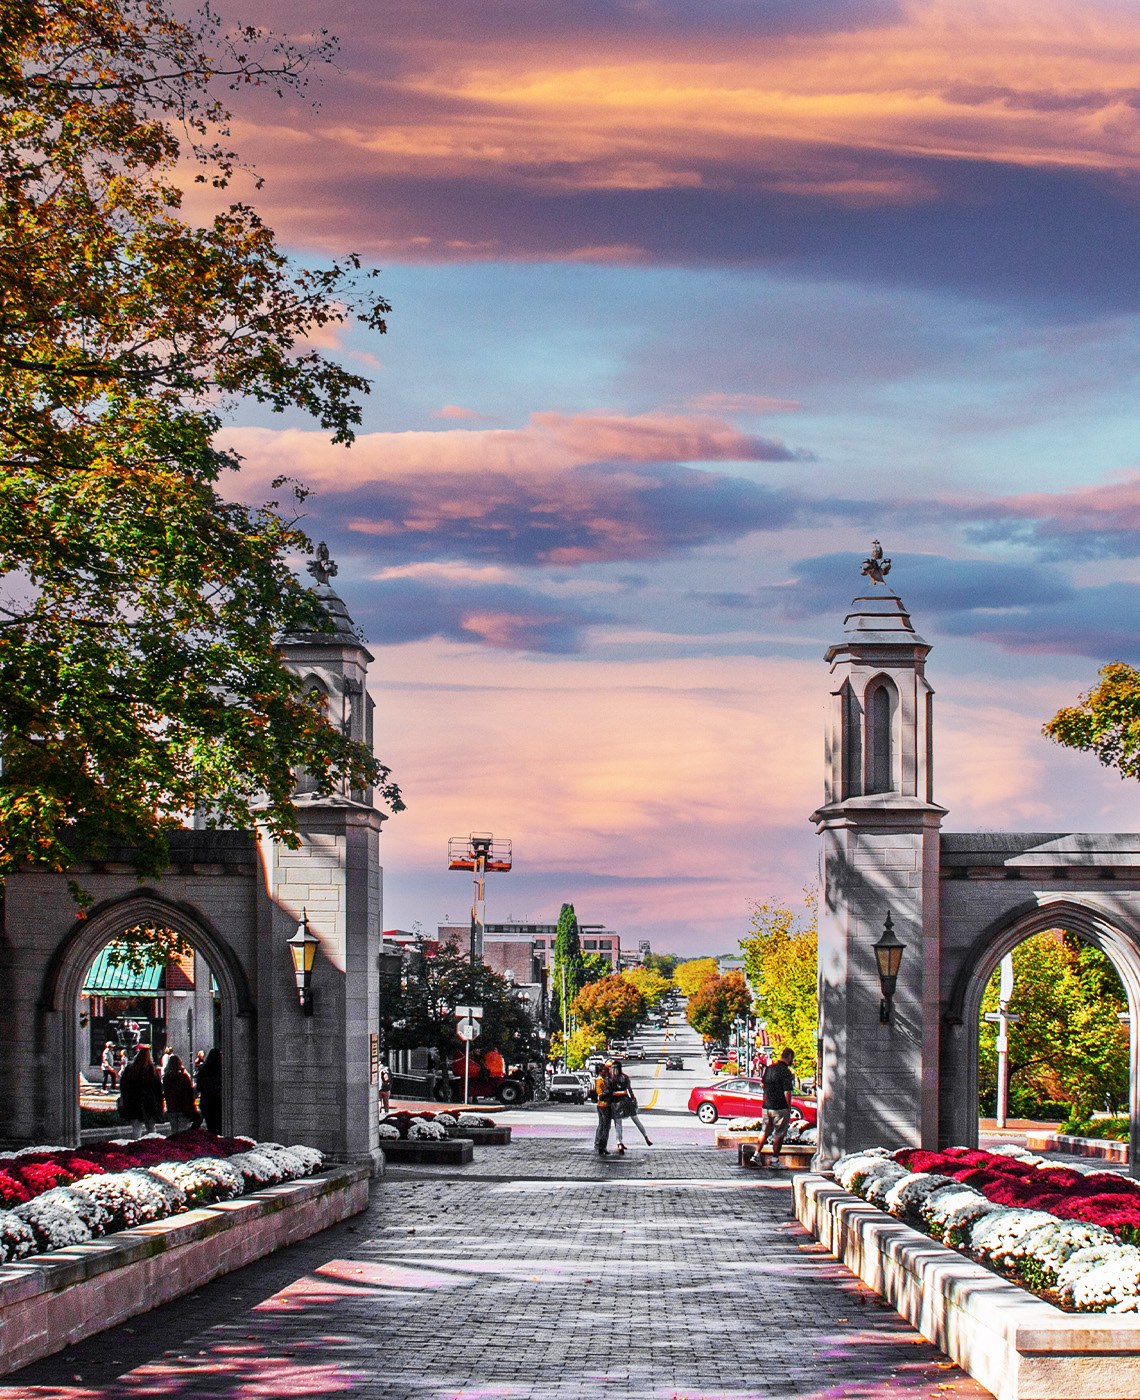 Indiana University sample gates at sunset with flowers and a view of the main street